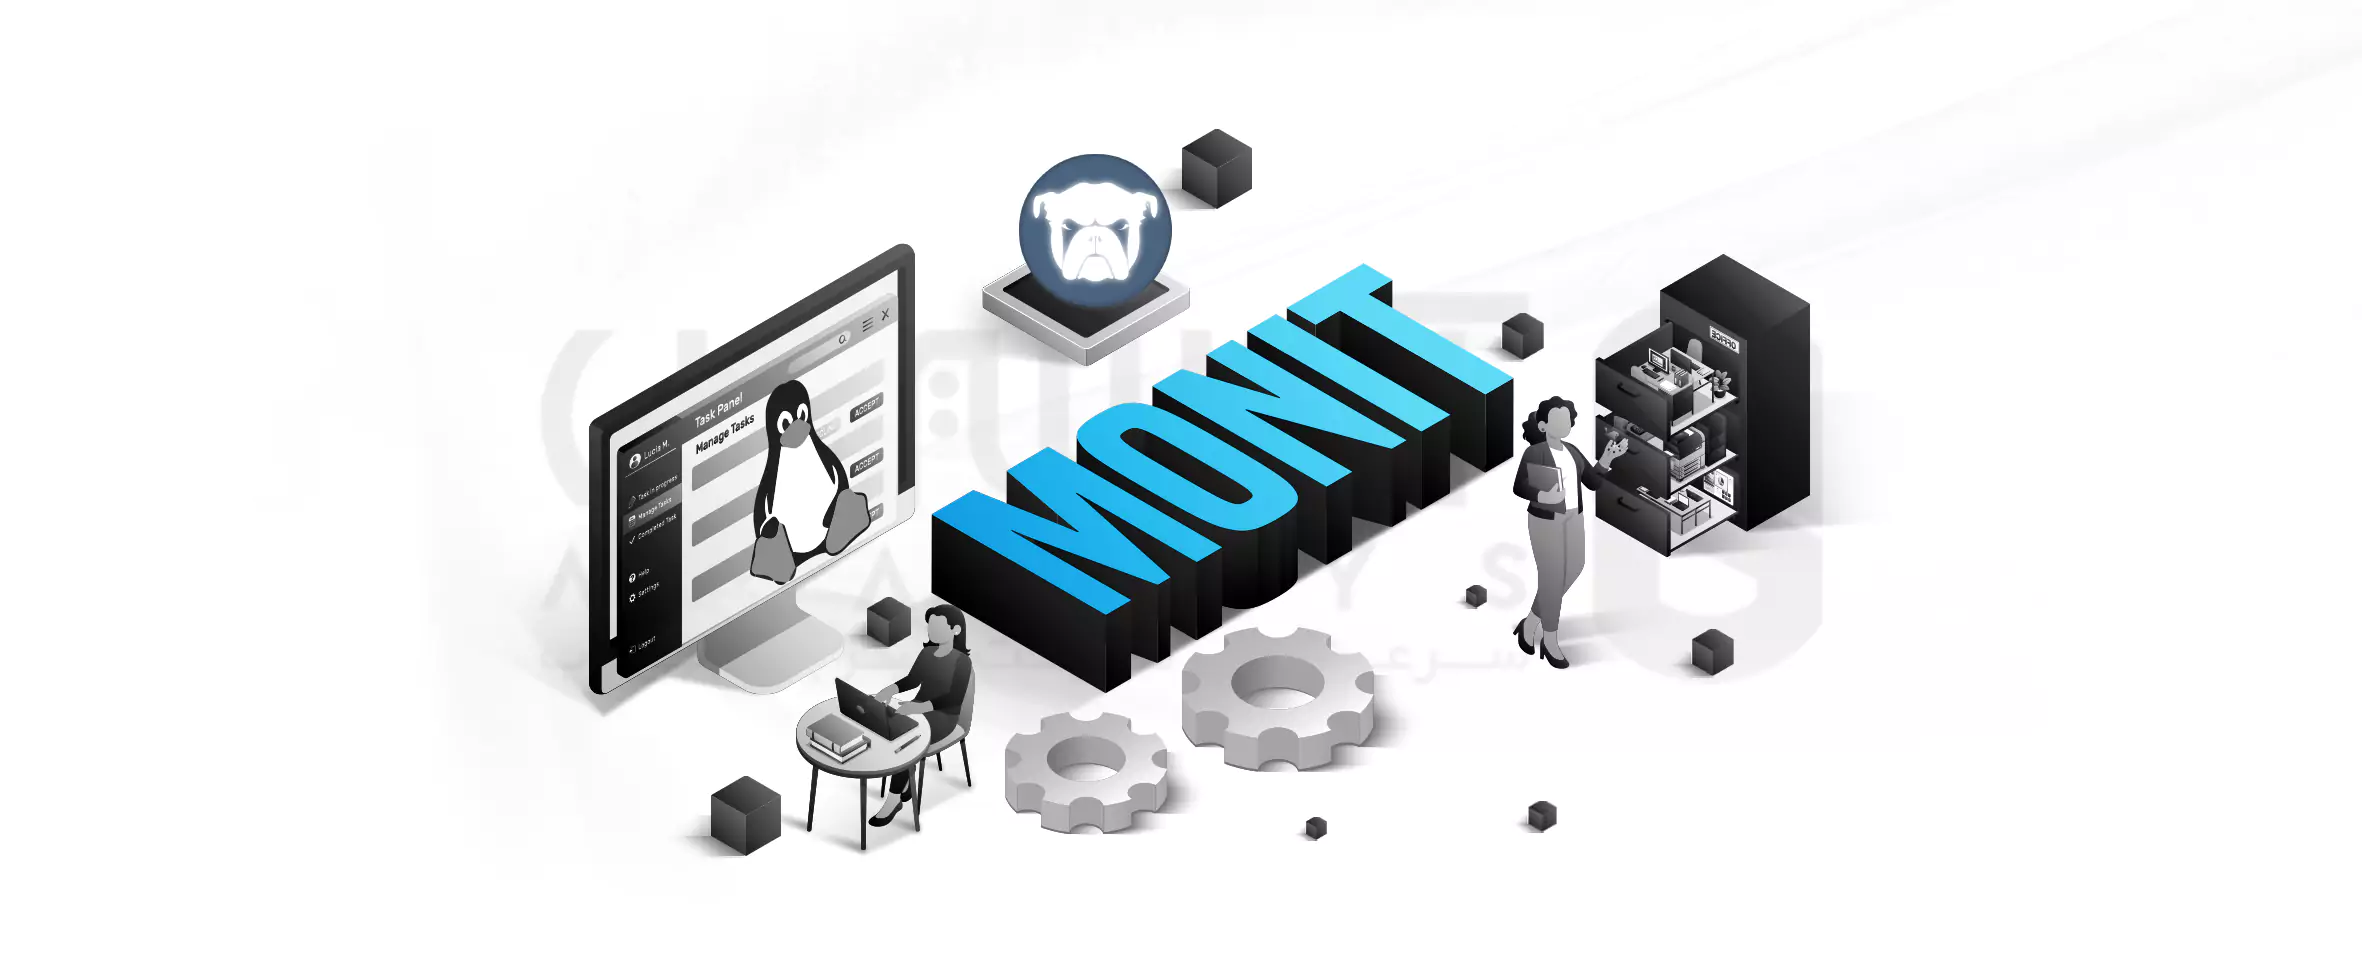 Introducing Monit the best Linux management and monitoring tool